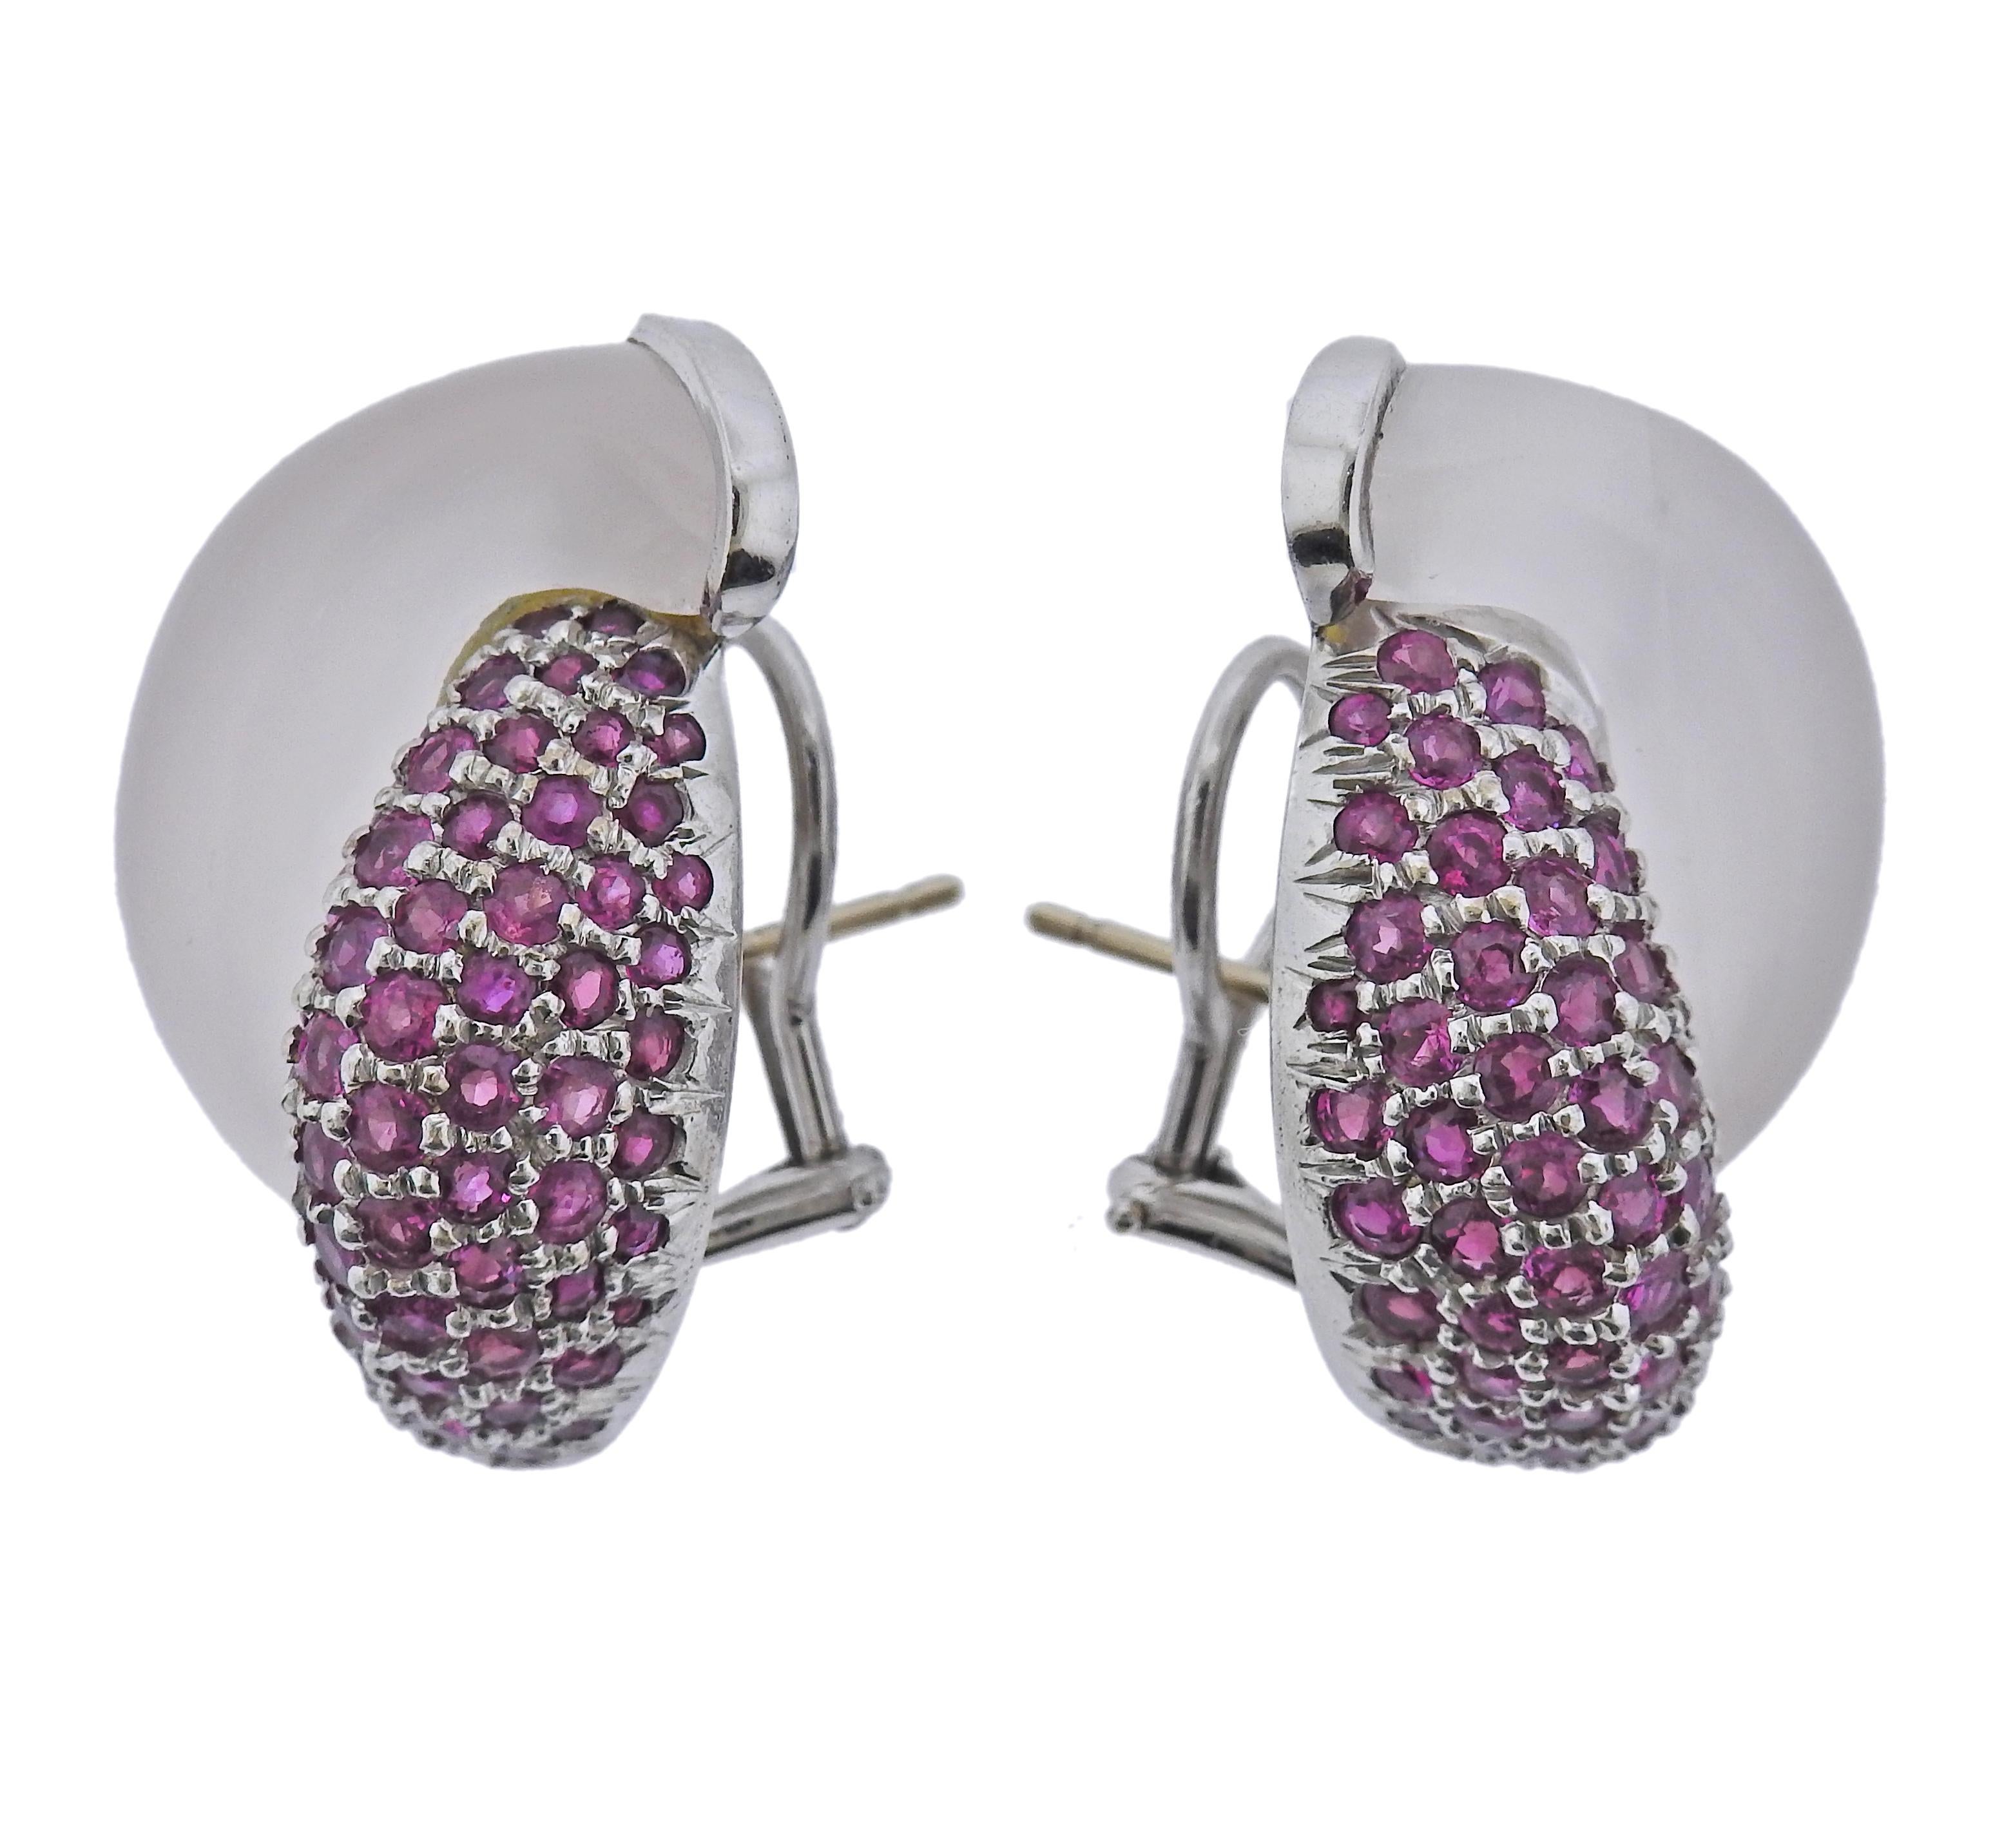 Pair of Seaman Schepps Link earrings, set in crystal and rubies. Earrings measure 32mm x 22mm. Marked: Seaman Schepps, 5072, Shell mark, 750. Weight - 30.3 grams.